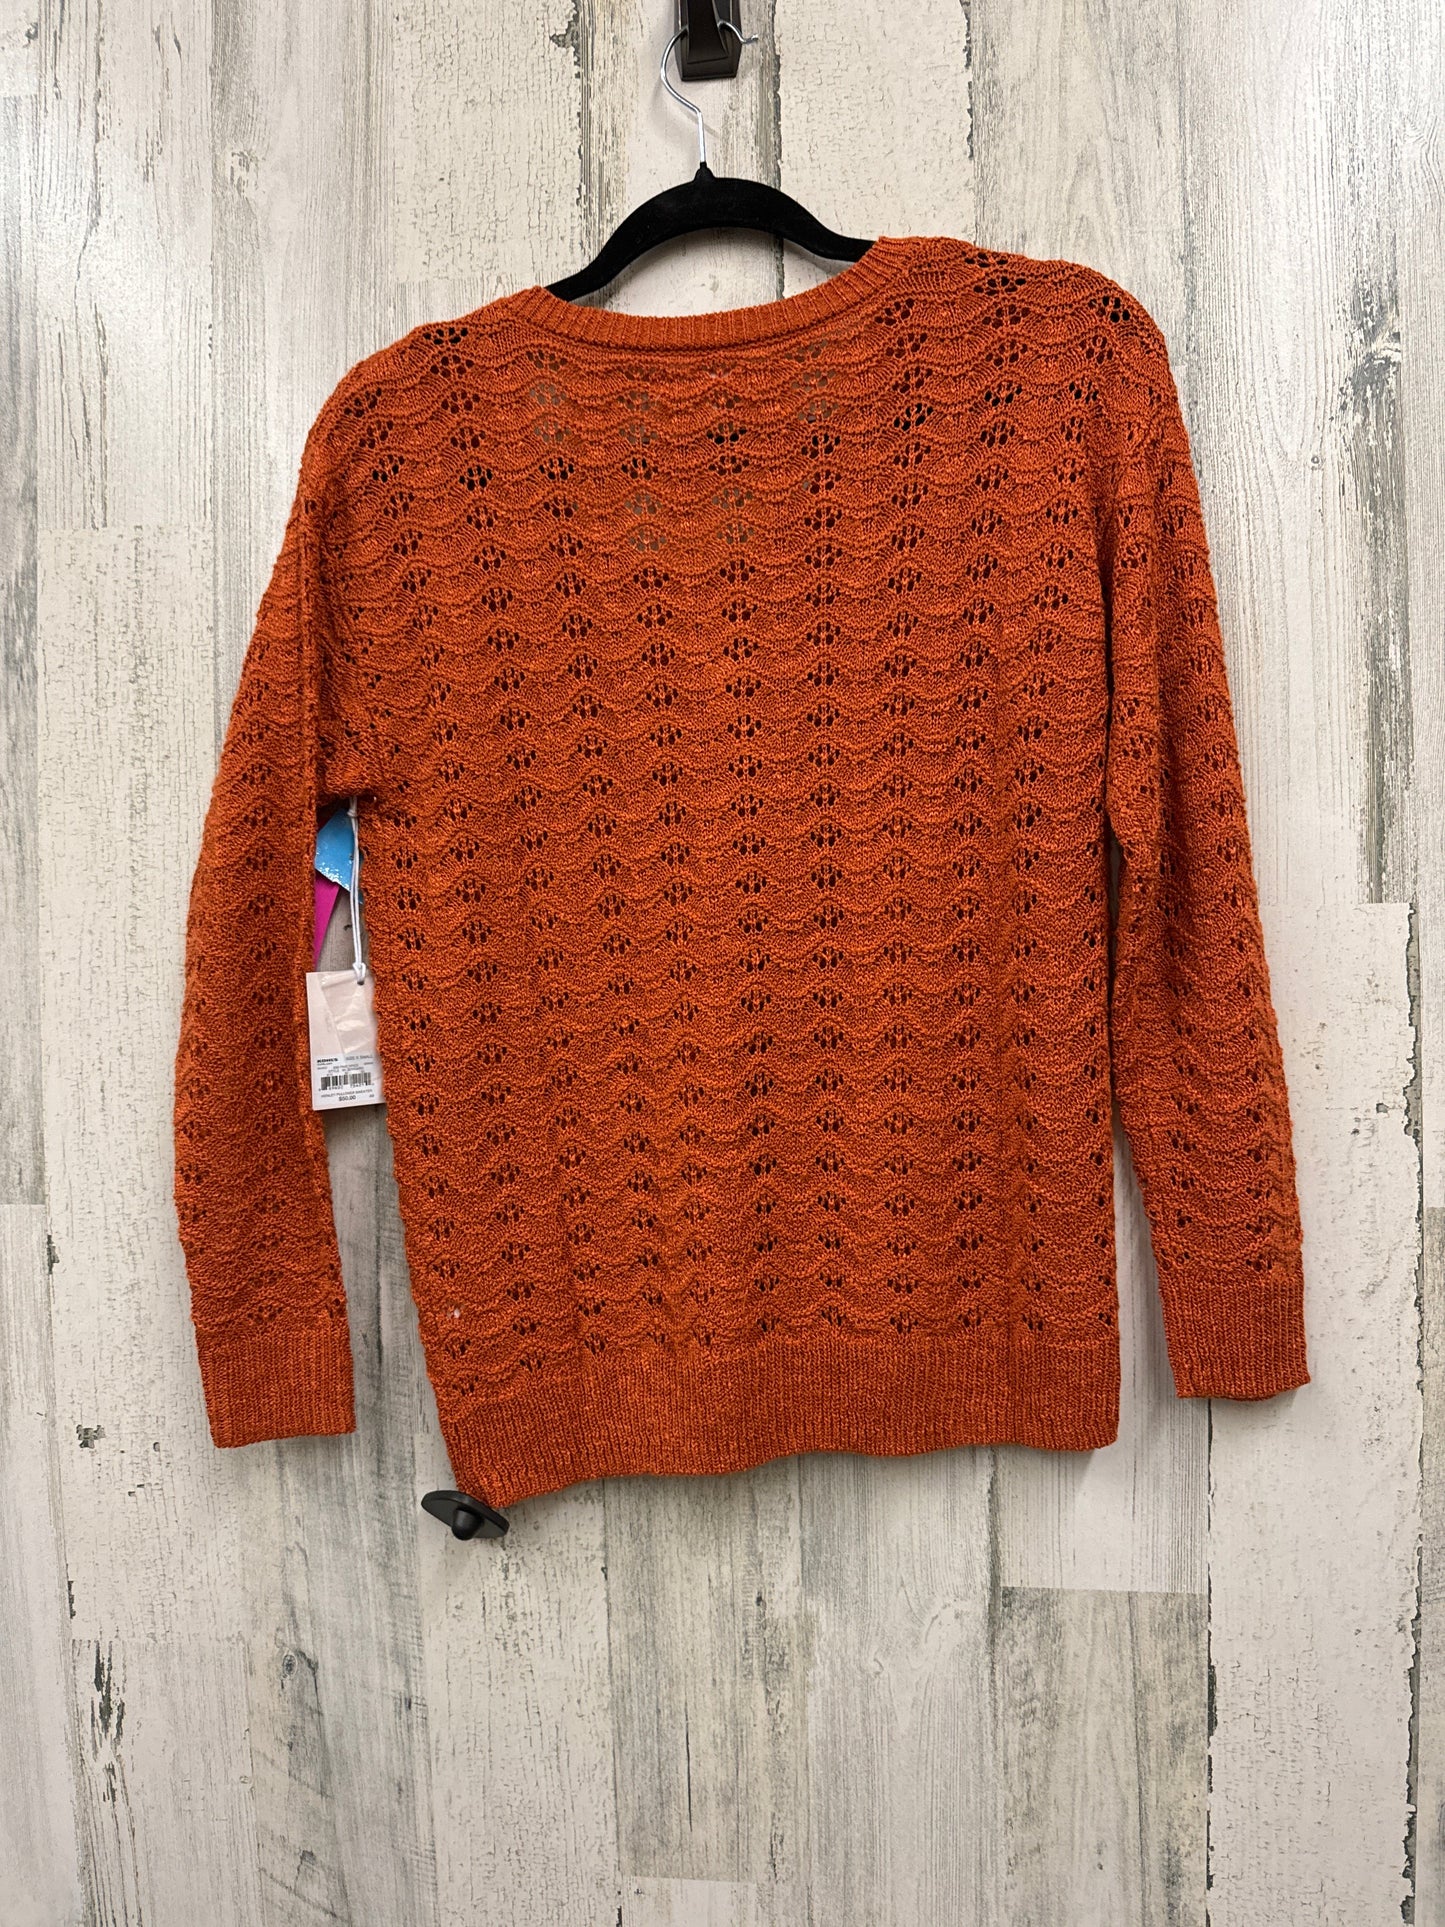 Sweater By Lc Lauren Conrad  Size: Xs